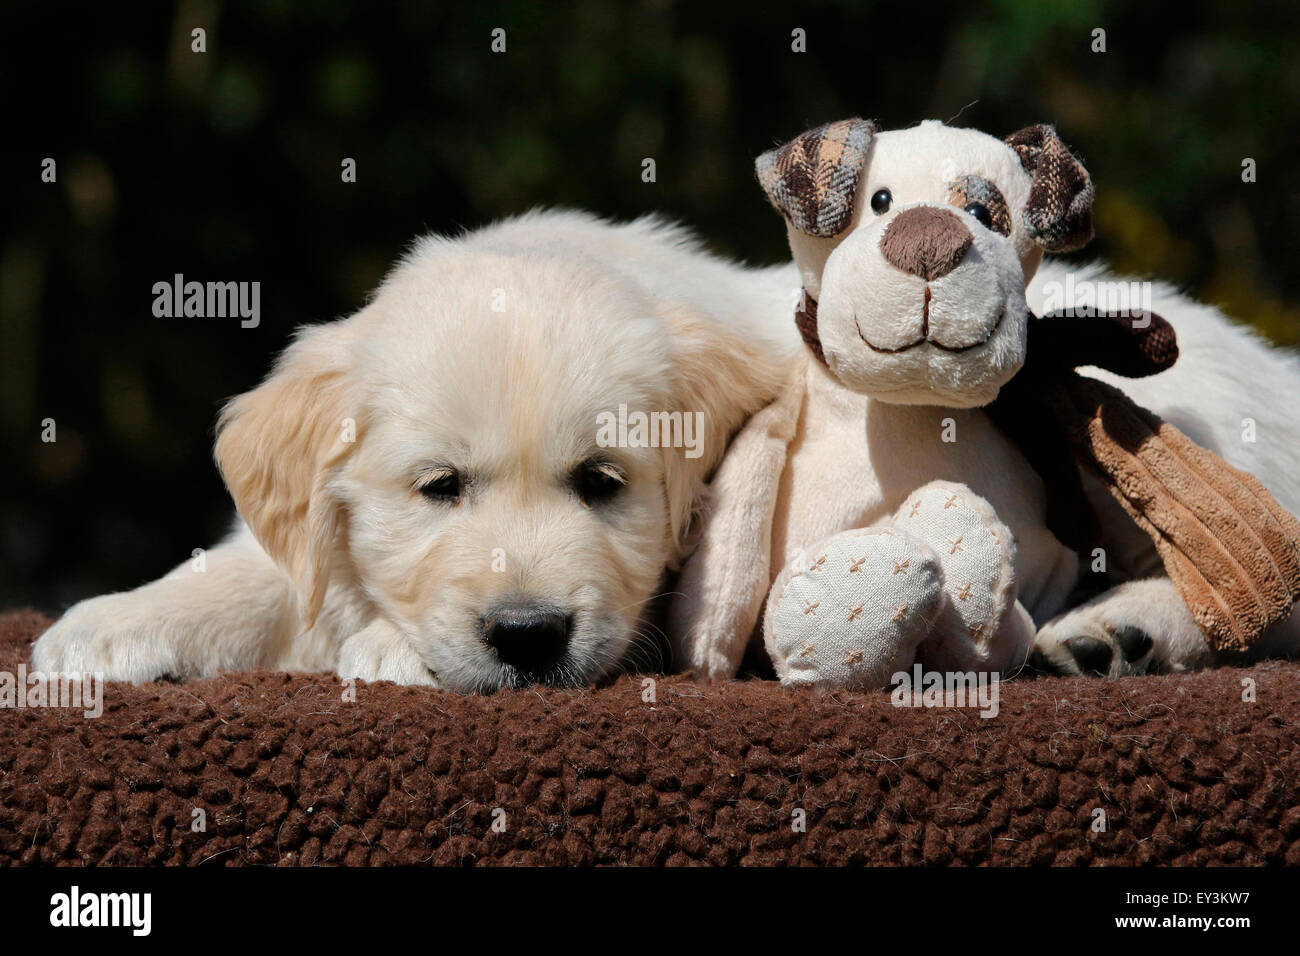 Golden Retriever. Puppy Tom (8 weeks old) lying next to a toy dog. Germany Stock Photo